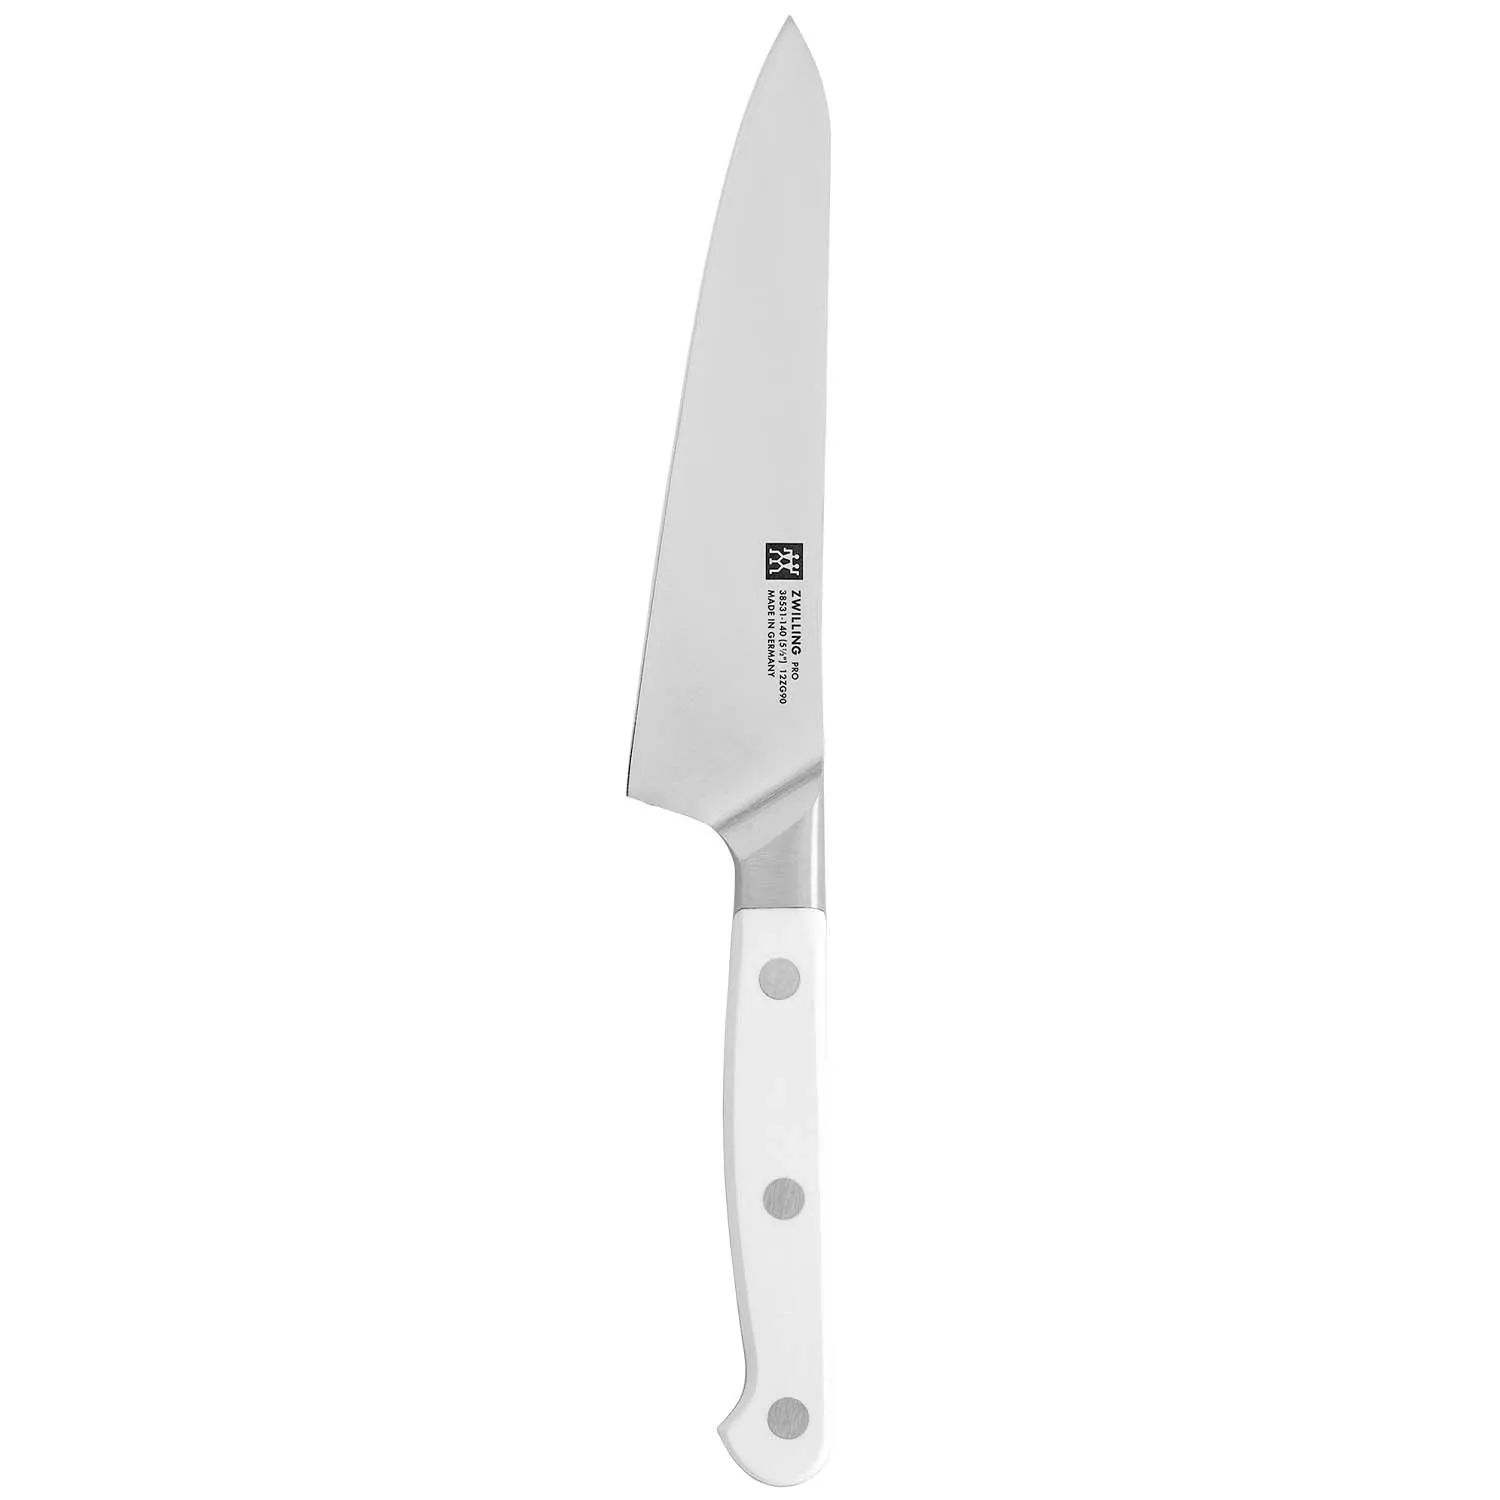 Zwilling - Pro Le Blanc 8 Chef's Knife